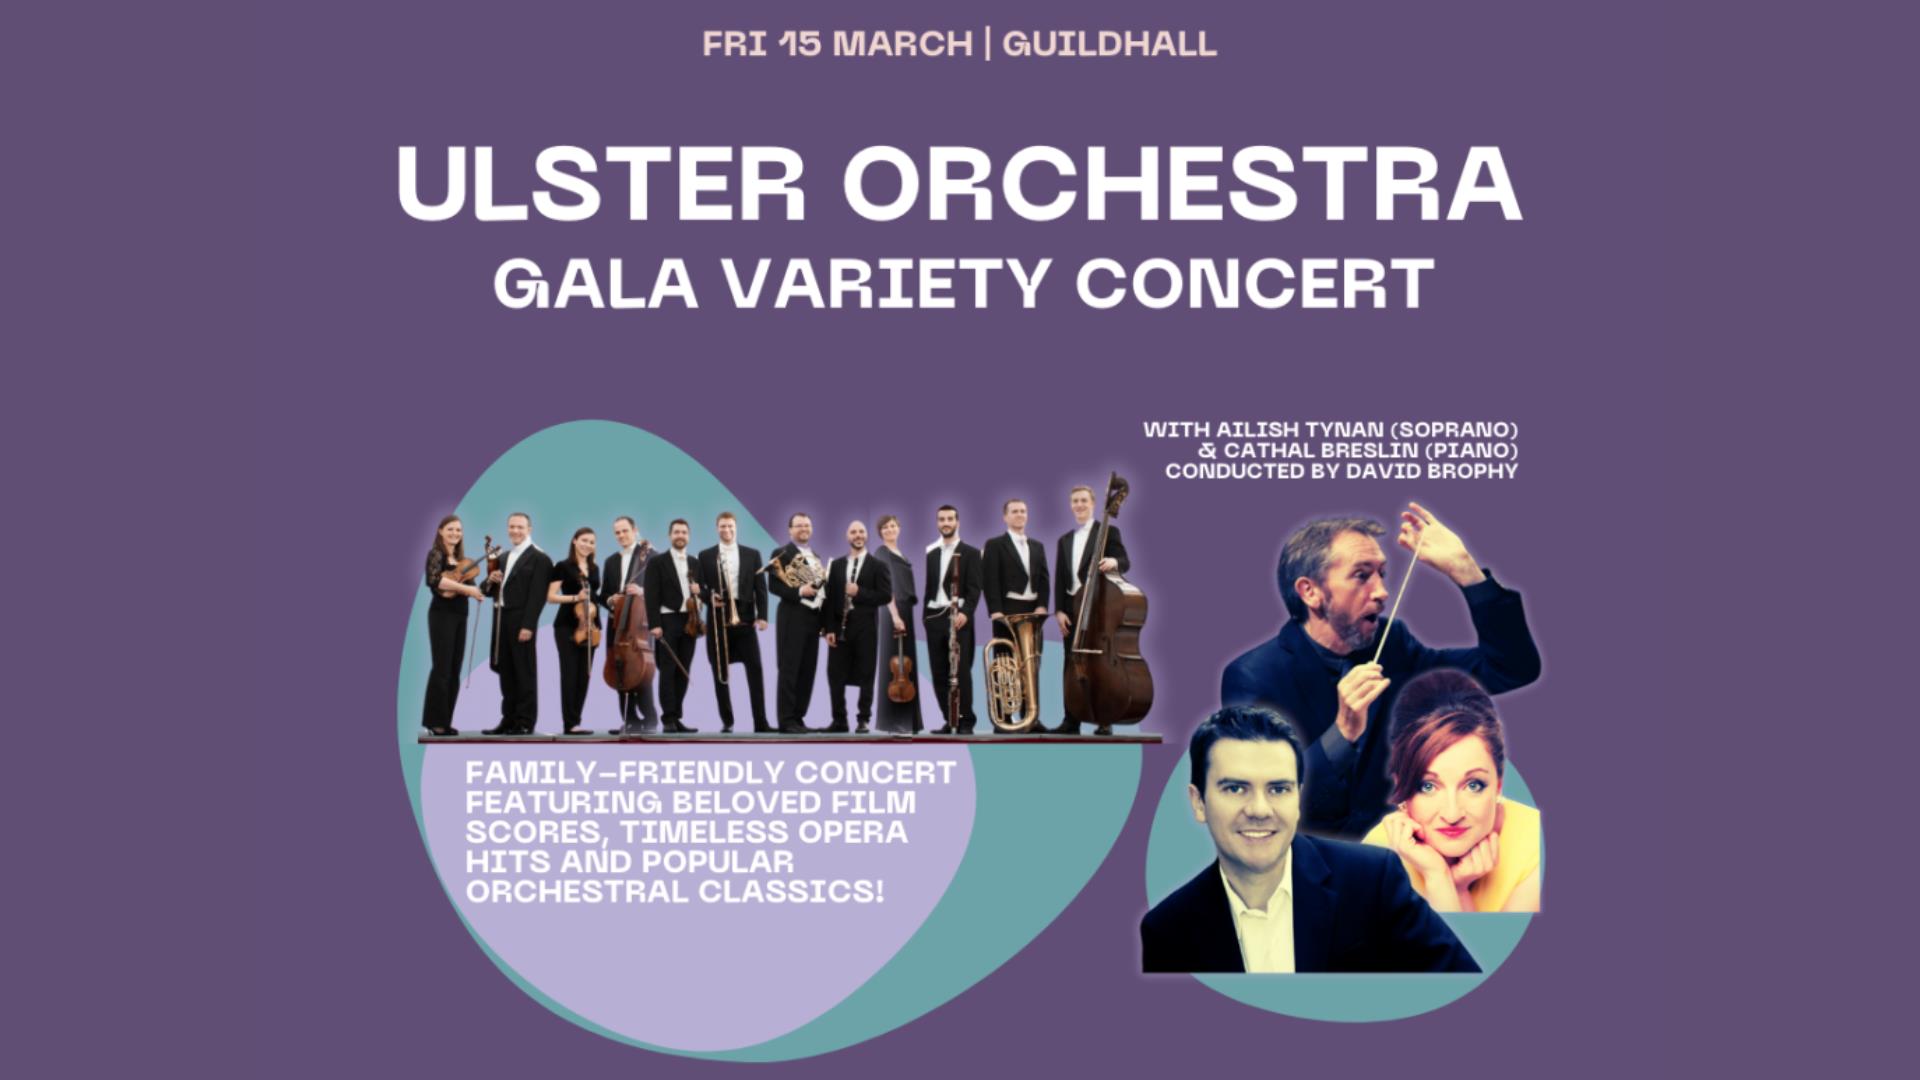 Promotional image for the 'Ulster Orchestra Gala Variety Concert', showing the featured artists.